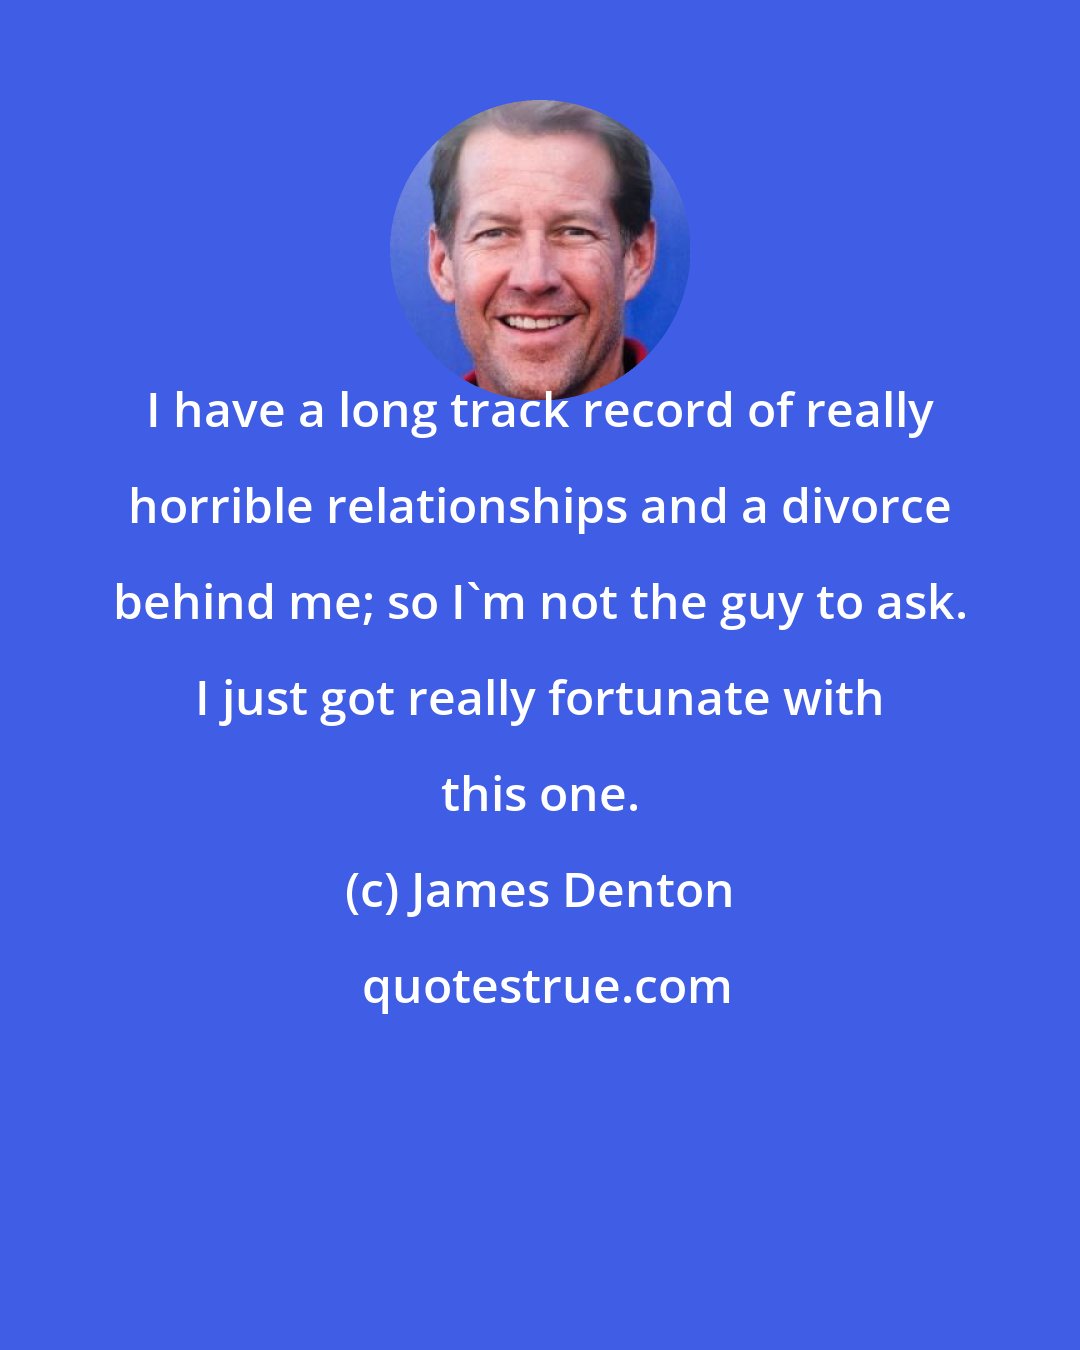 James Denton: I have a long track record of really horrible relationships and a divorce behind me; so I'm not the guy to ask. I just got really fortunate with this one.